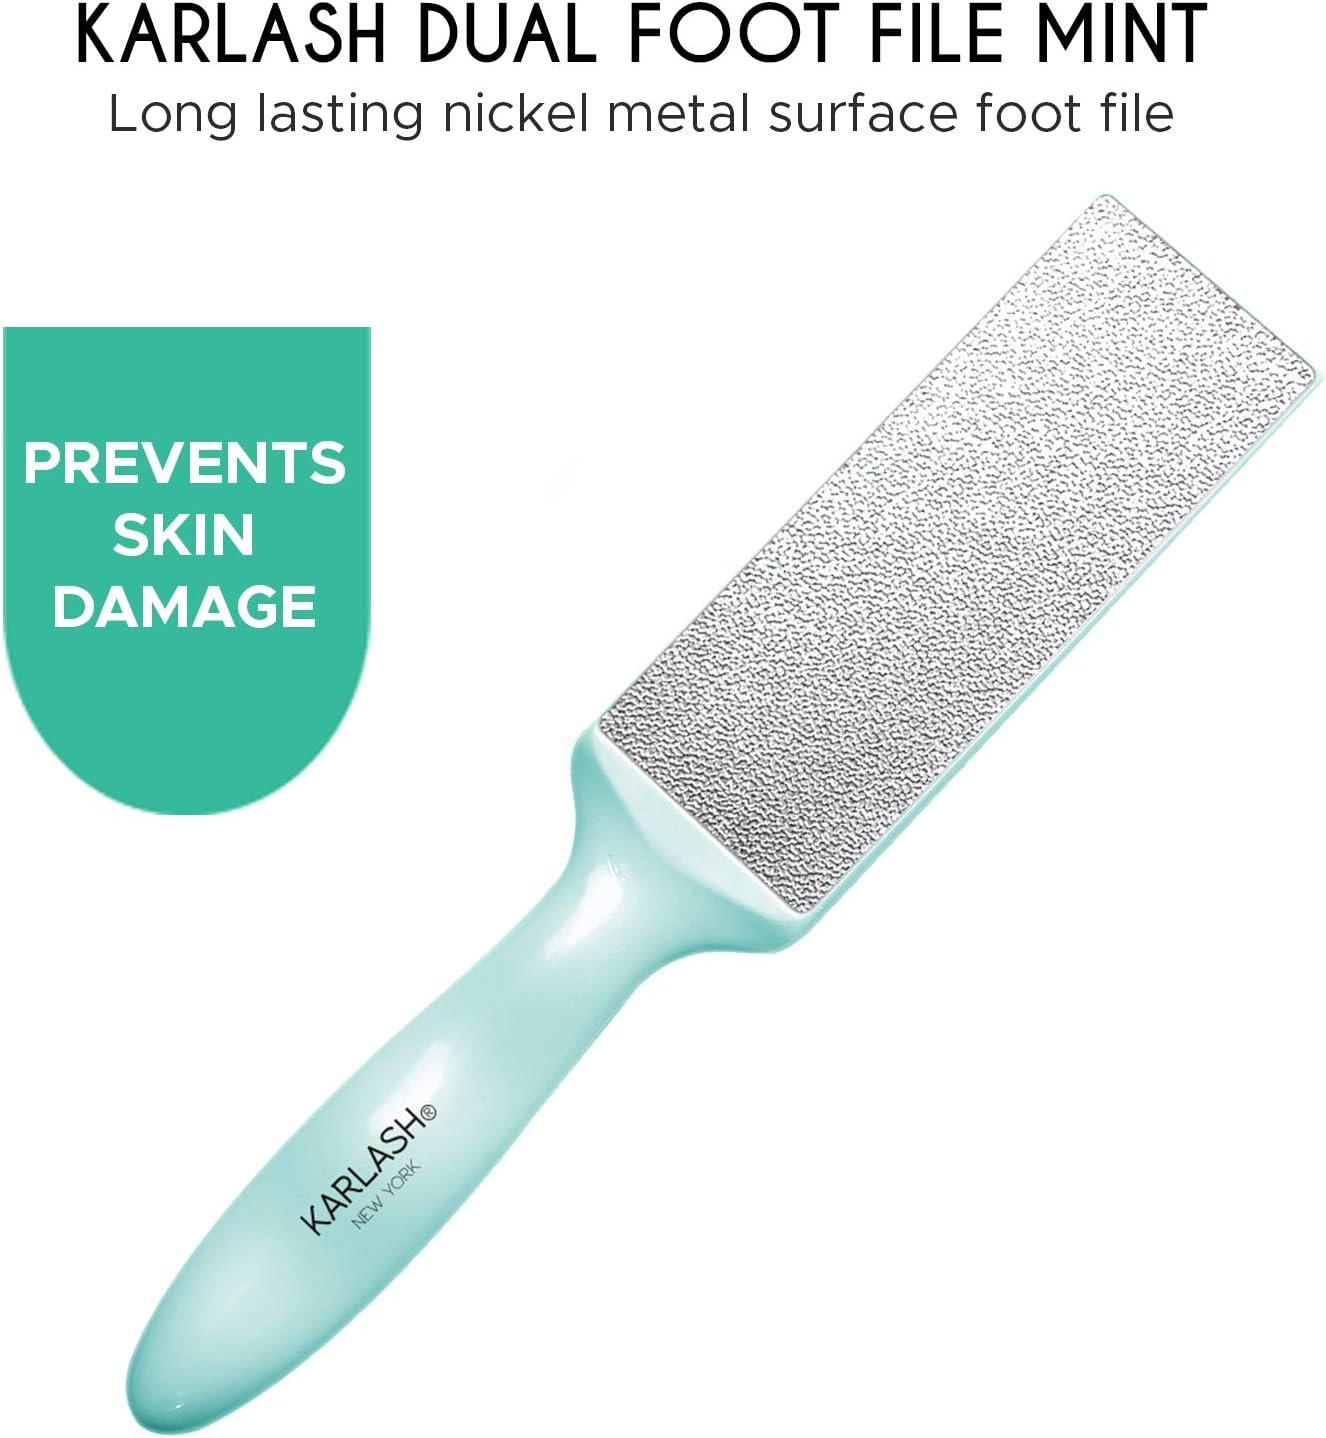 Karlash 2-Sided Nickel Foot File for Callus Trimming and Callus Removal, Mint (Pack of 1)